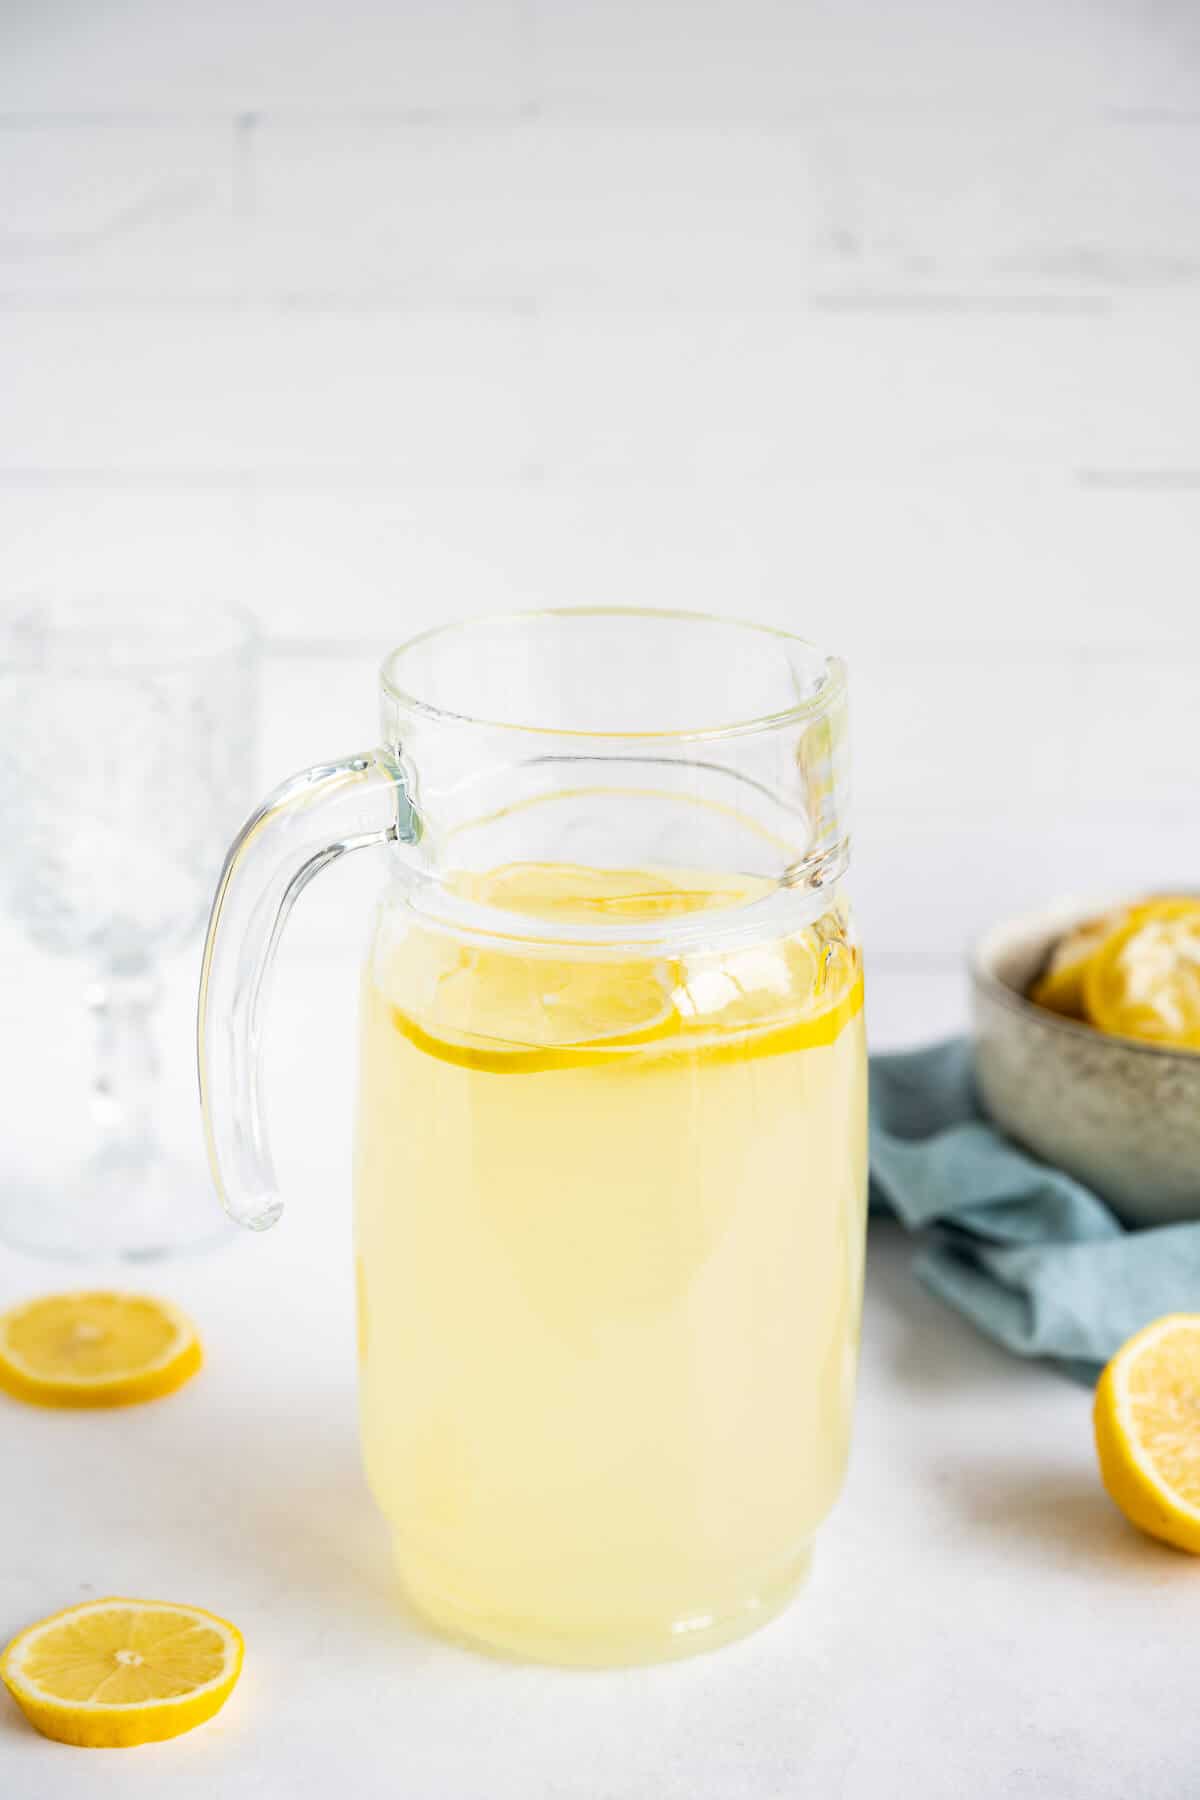 Clear glass pitcher filled with Keto Lemonade. Lemon slices laying next to the pitcher and inside.